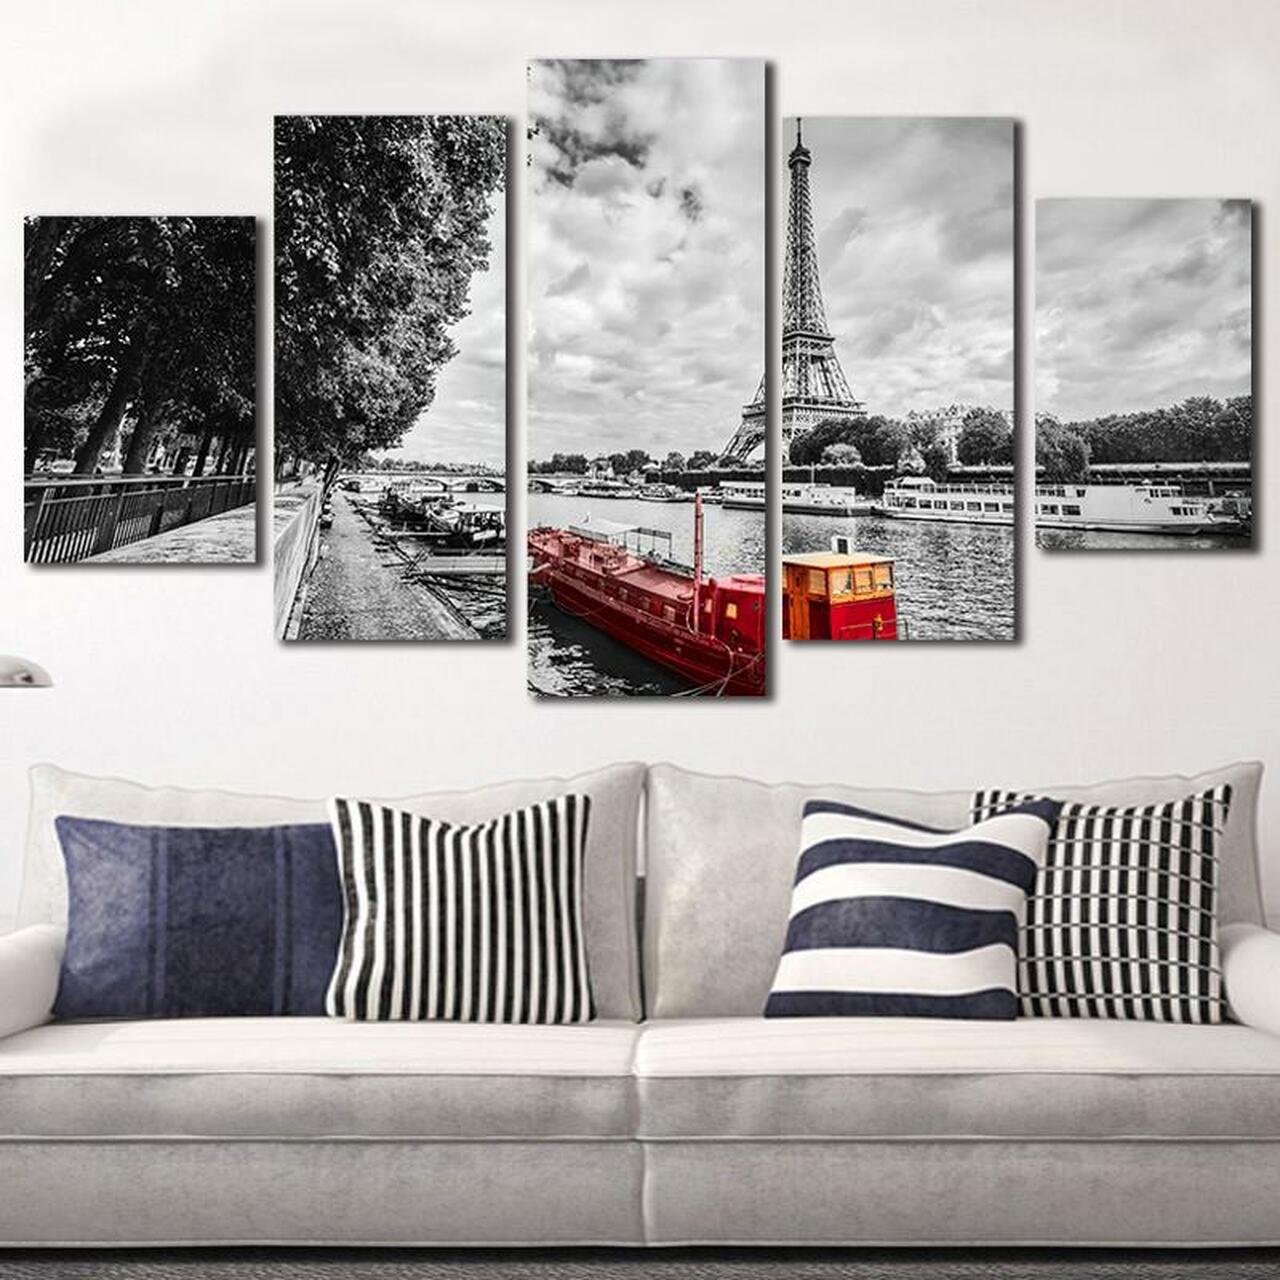 Red Boat in Paris 5 Piece Canvas Art Wall Decor